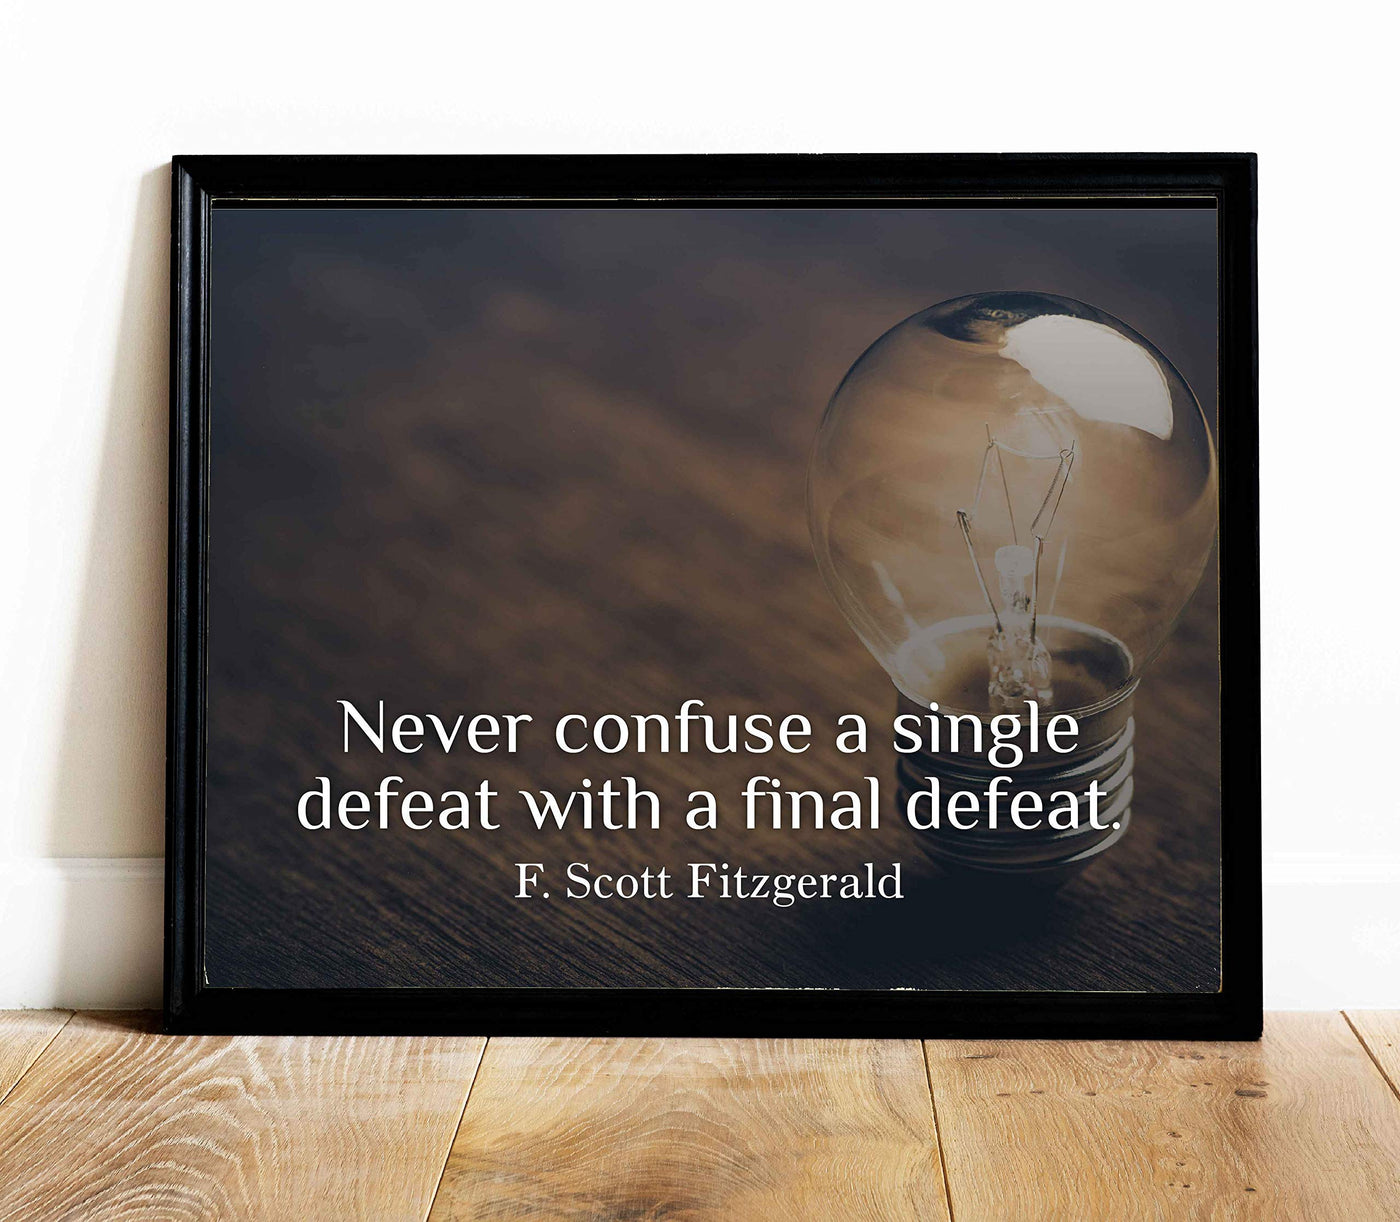 ?Never Confuse A Single Defeat With A Final Defeat" F. Scott Fitzgerald Quotes-14 x 11" Inspirational Wall Art Print-Ready to Frame. Motivational Home-Office-Studio-Dorm Decor. Great Literary Gift!